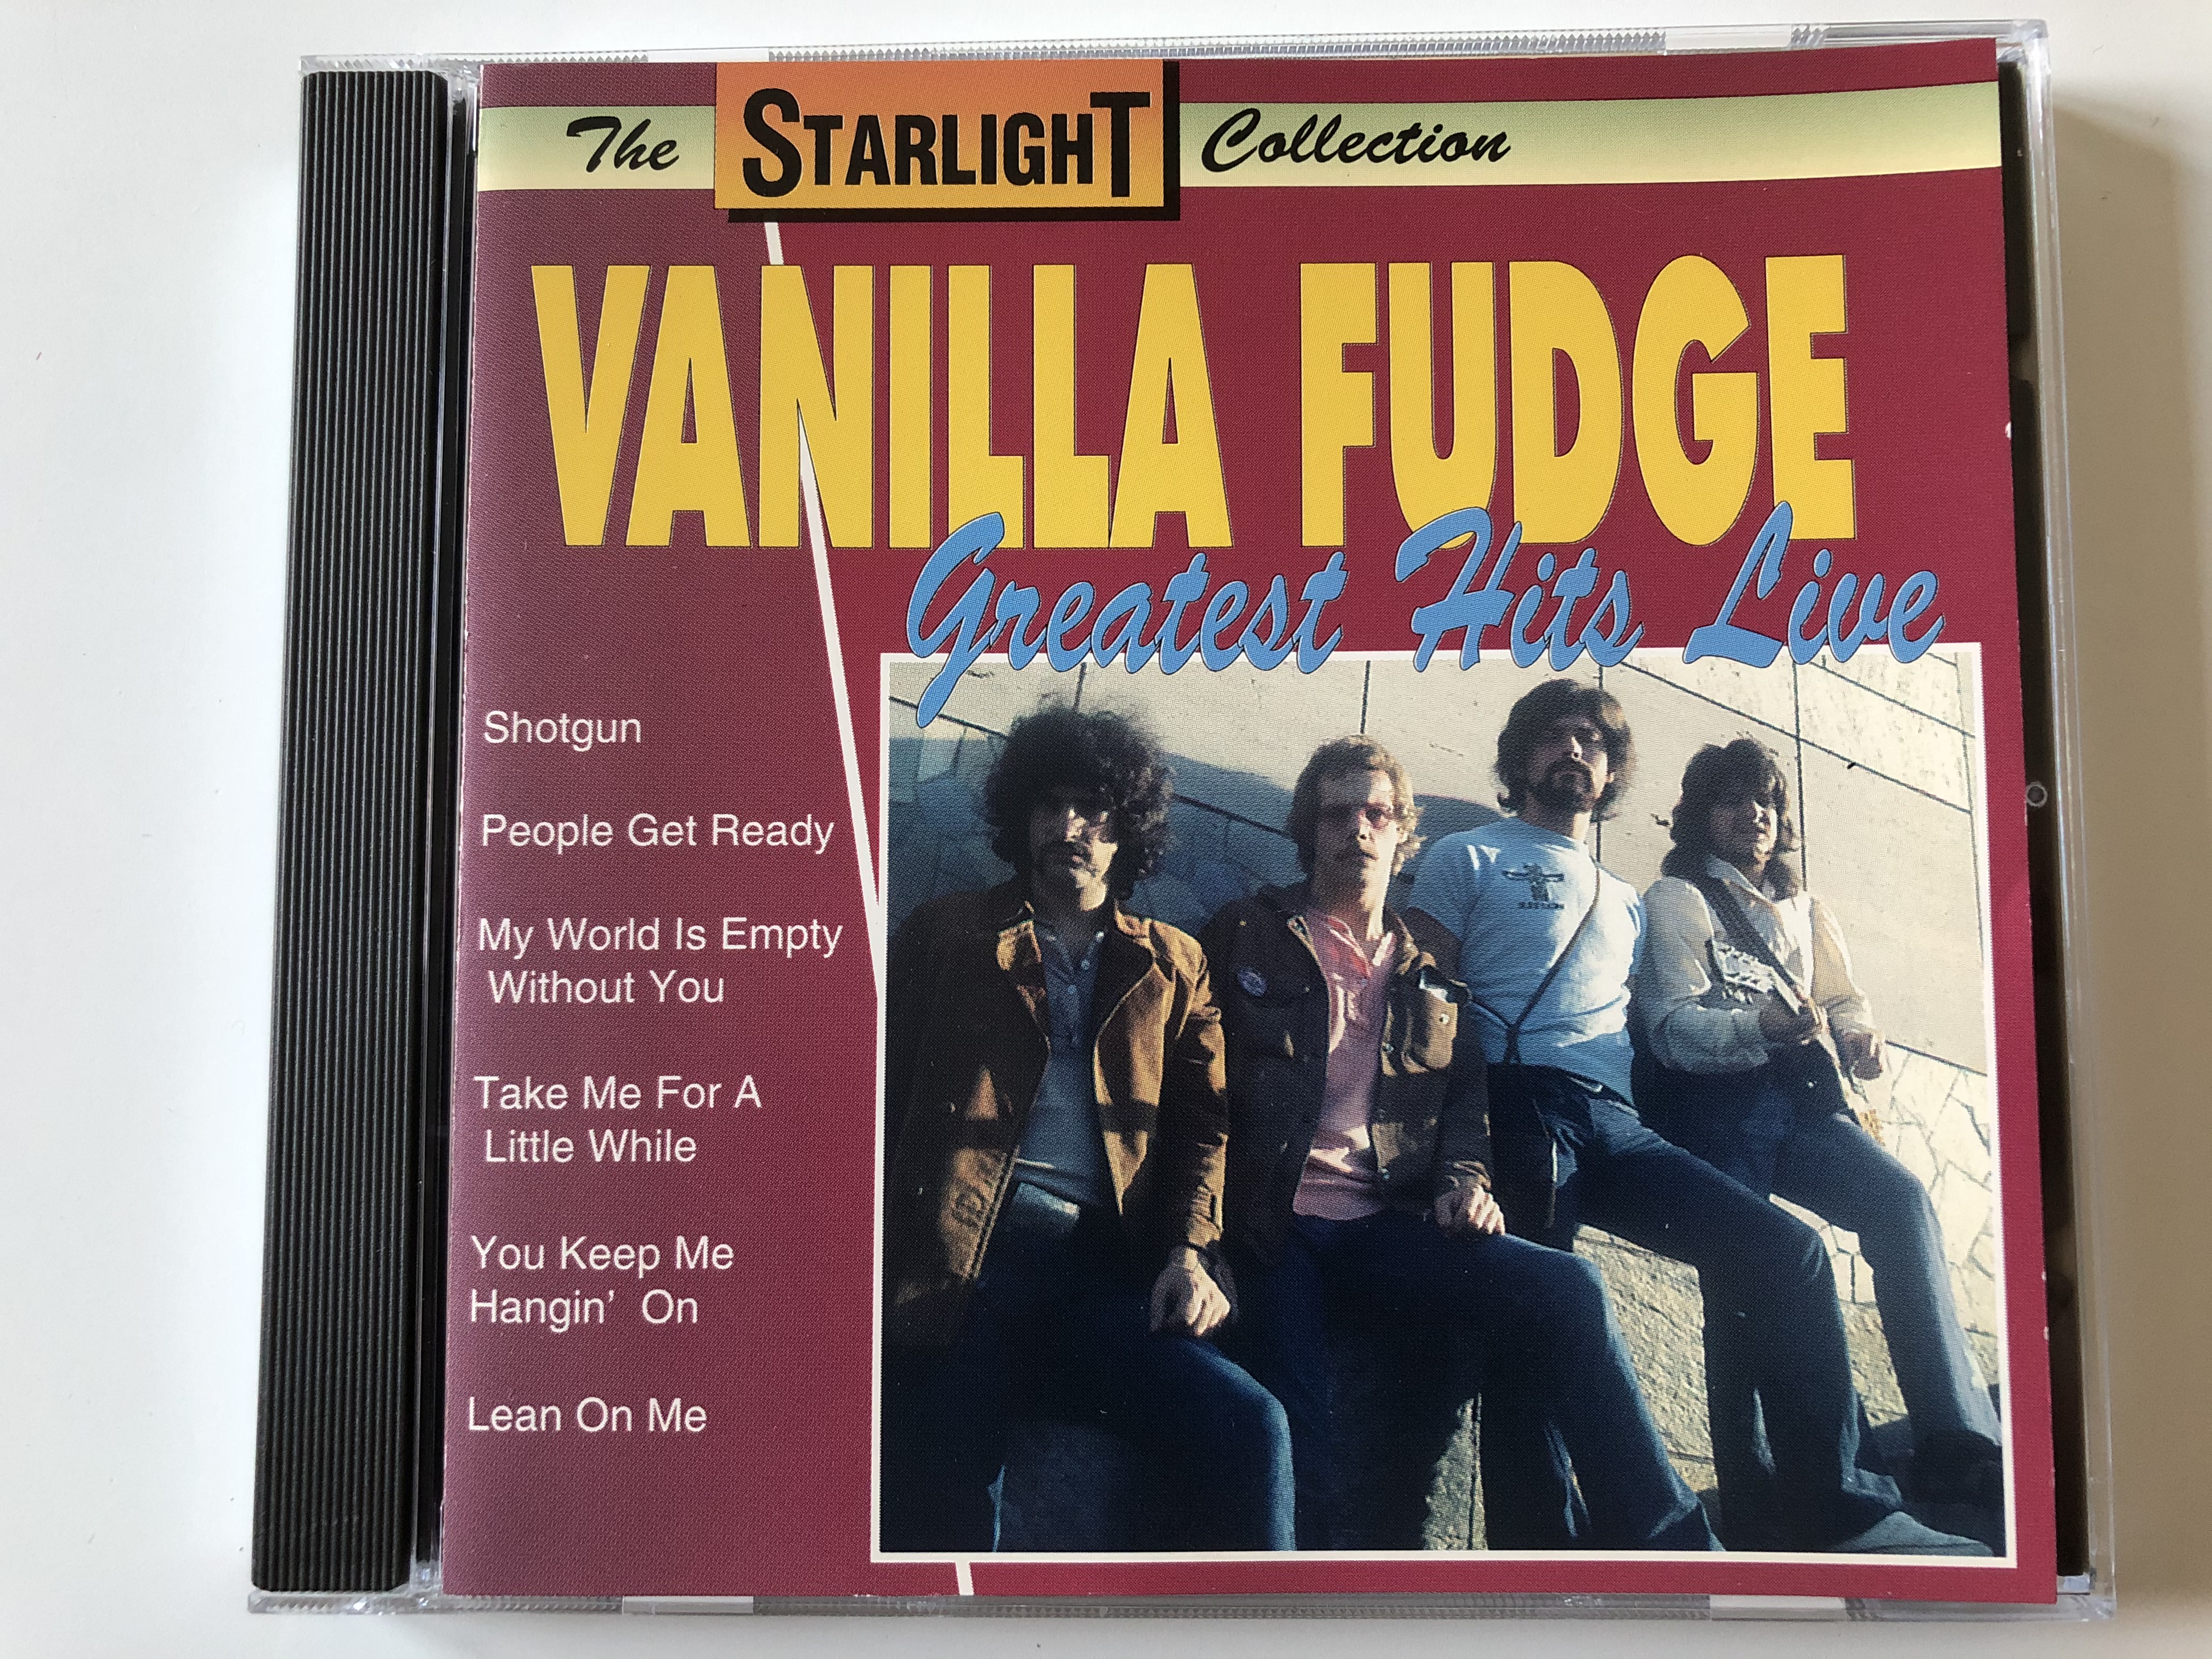 the-starlight-collection-vanilla-fudge-greatest-hits-live-shotgun-people-get-ready-my-world-is-empty-without-you-take-me-for-a-little-while-you-keep-me-hangin-on-galaxy-music-ltd.-au-1-.jpg